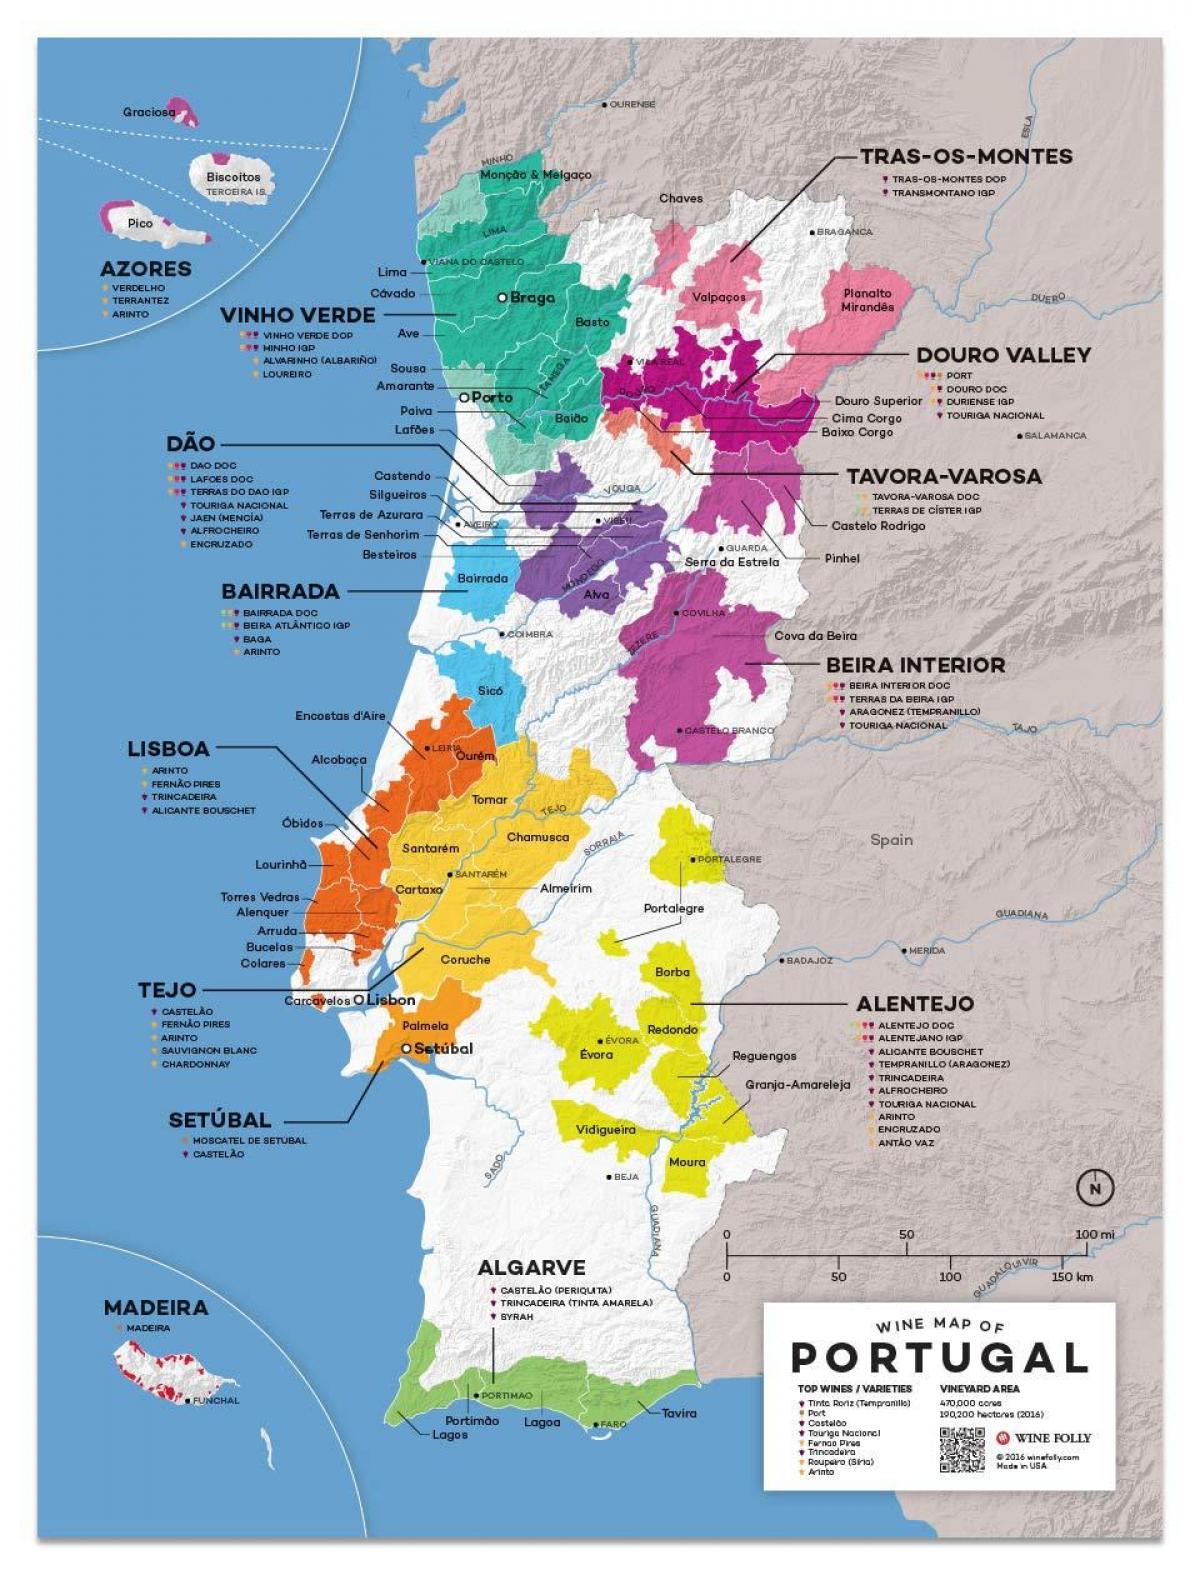 wine map of Portugal